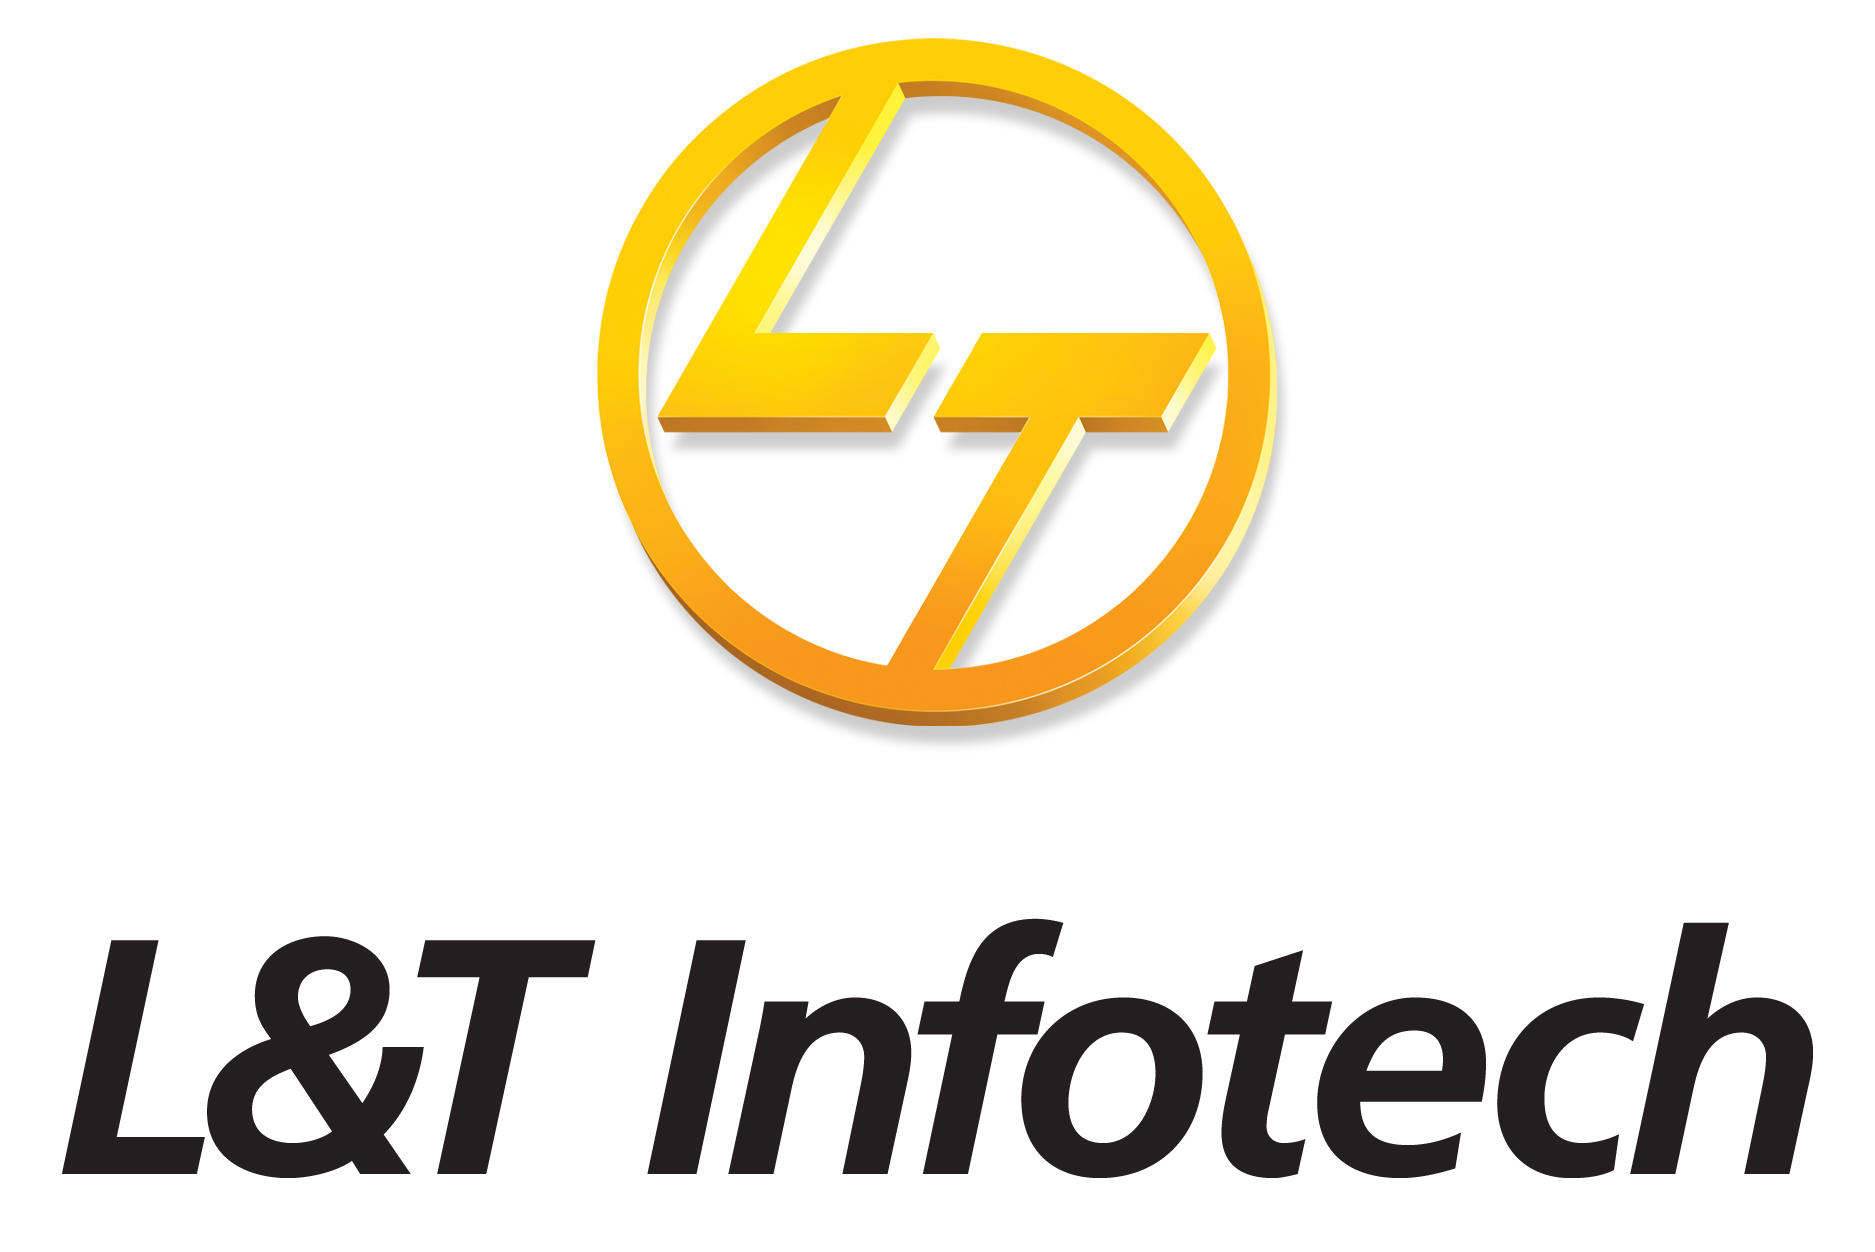 L&T Infotech acquires AI firm Lymbyc for Rs 38 crore_40.1